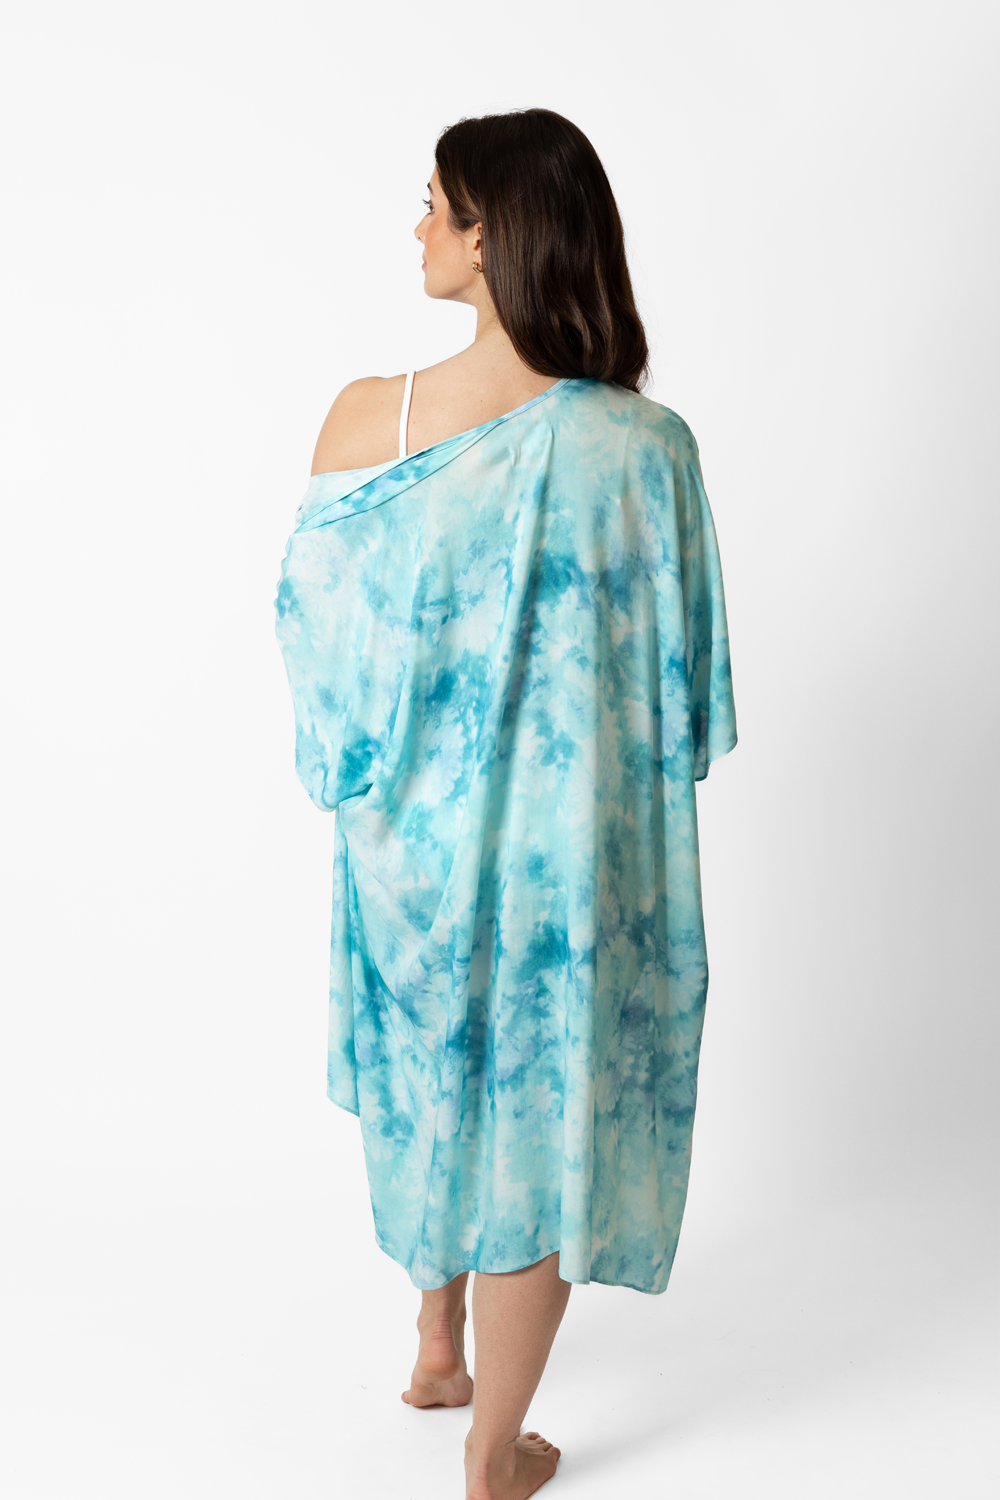 the back of a woman wearing a blue tie sye print kimono that goes up to her ankle with one side drop off her shoulder